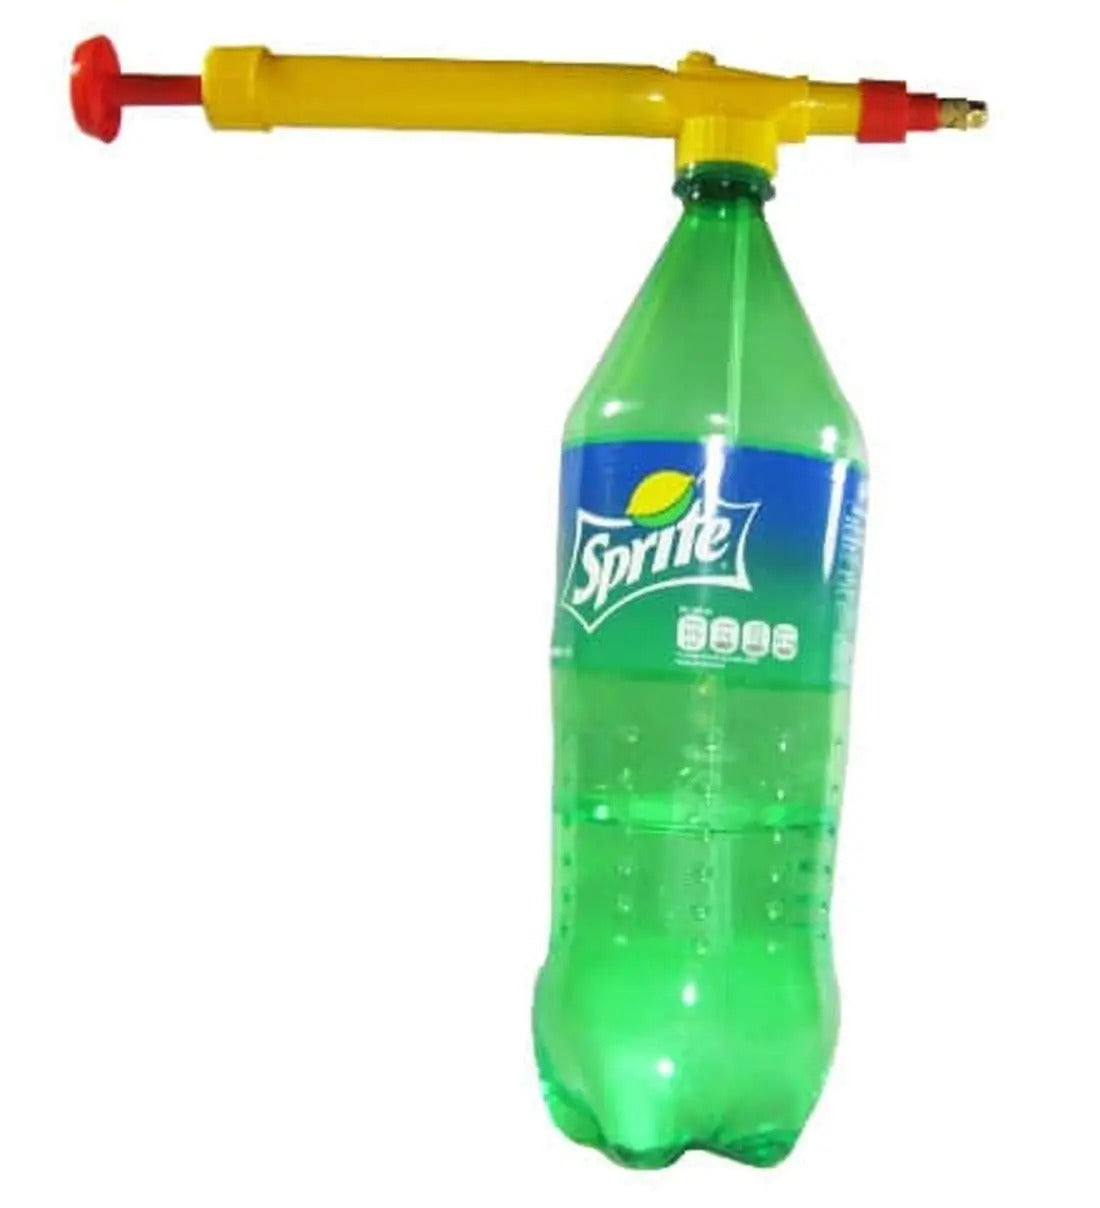 Handheld Mist Spray Pump (Shipping Included)